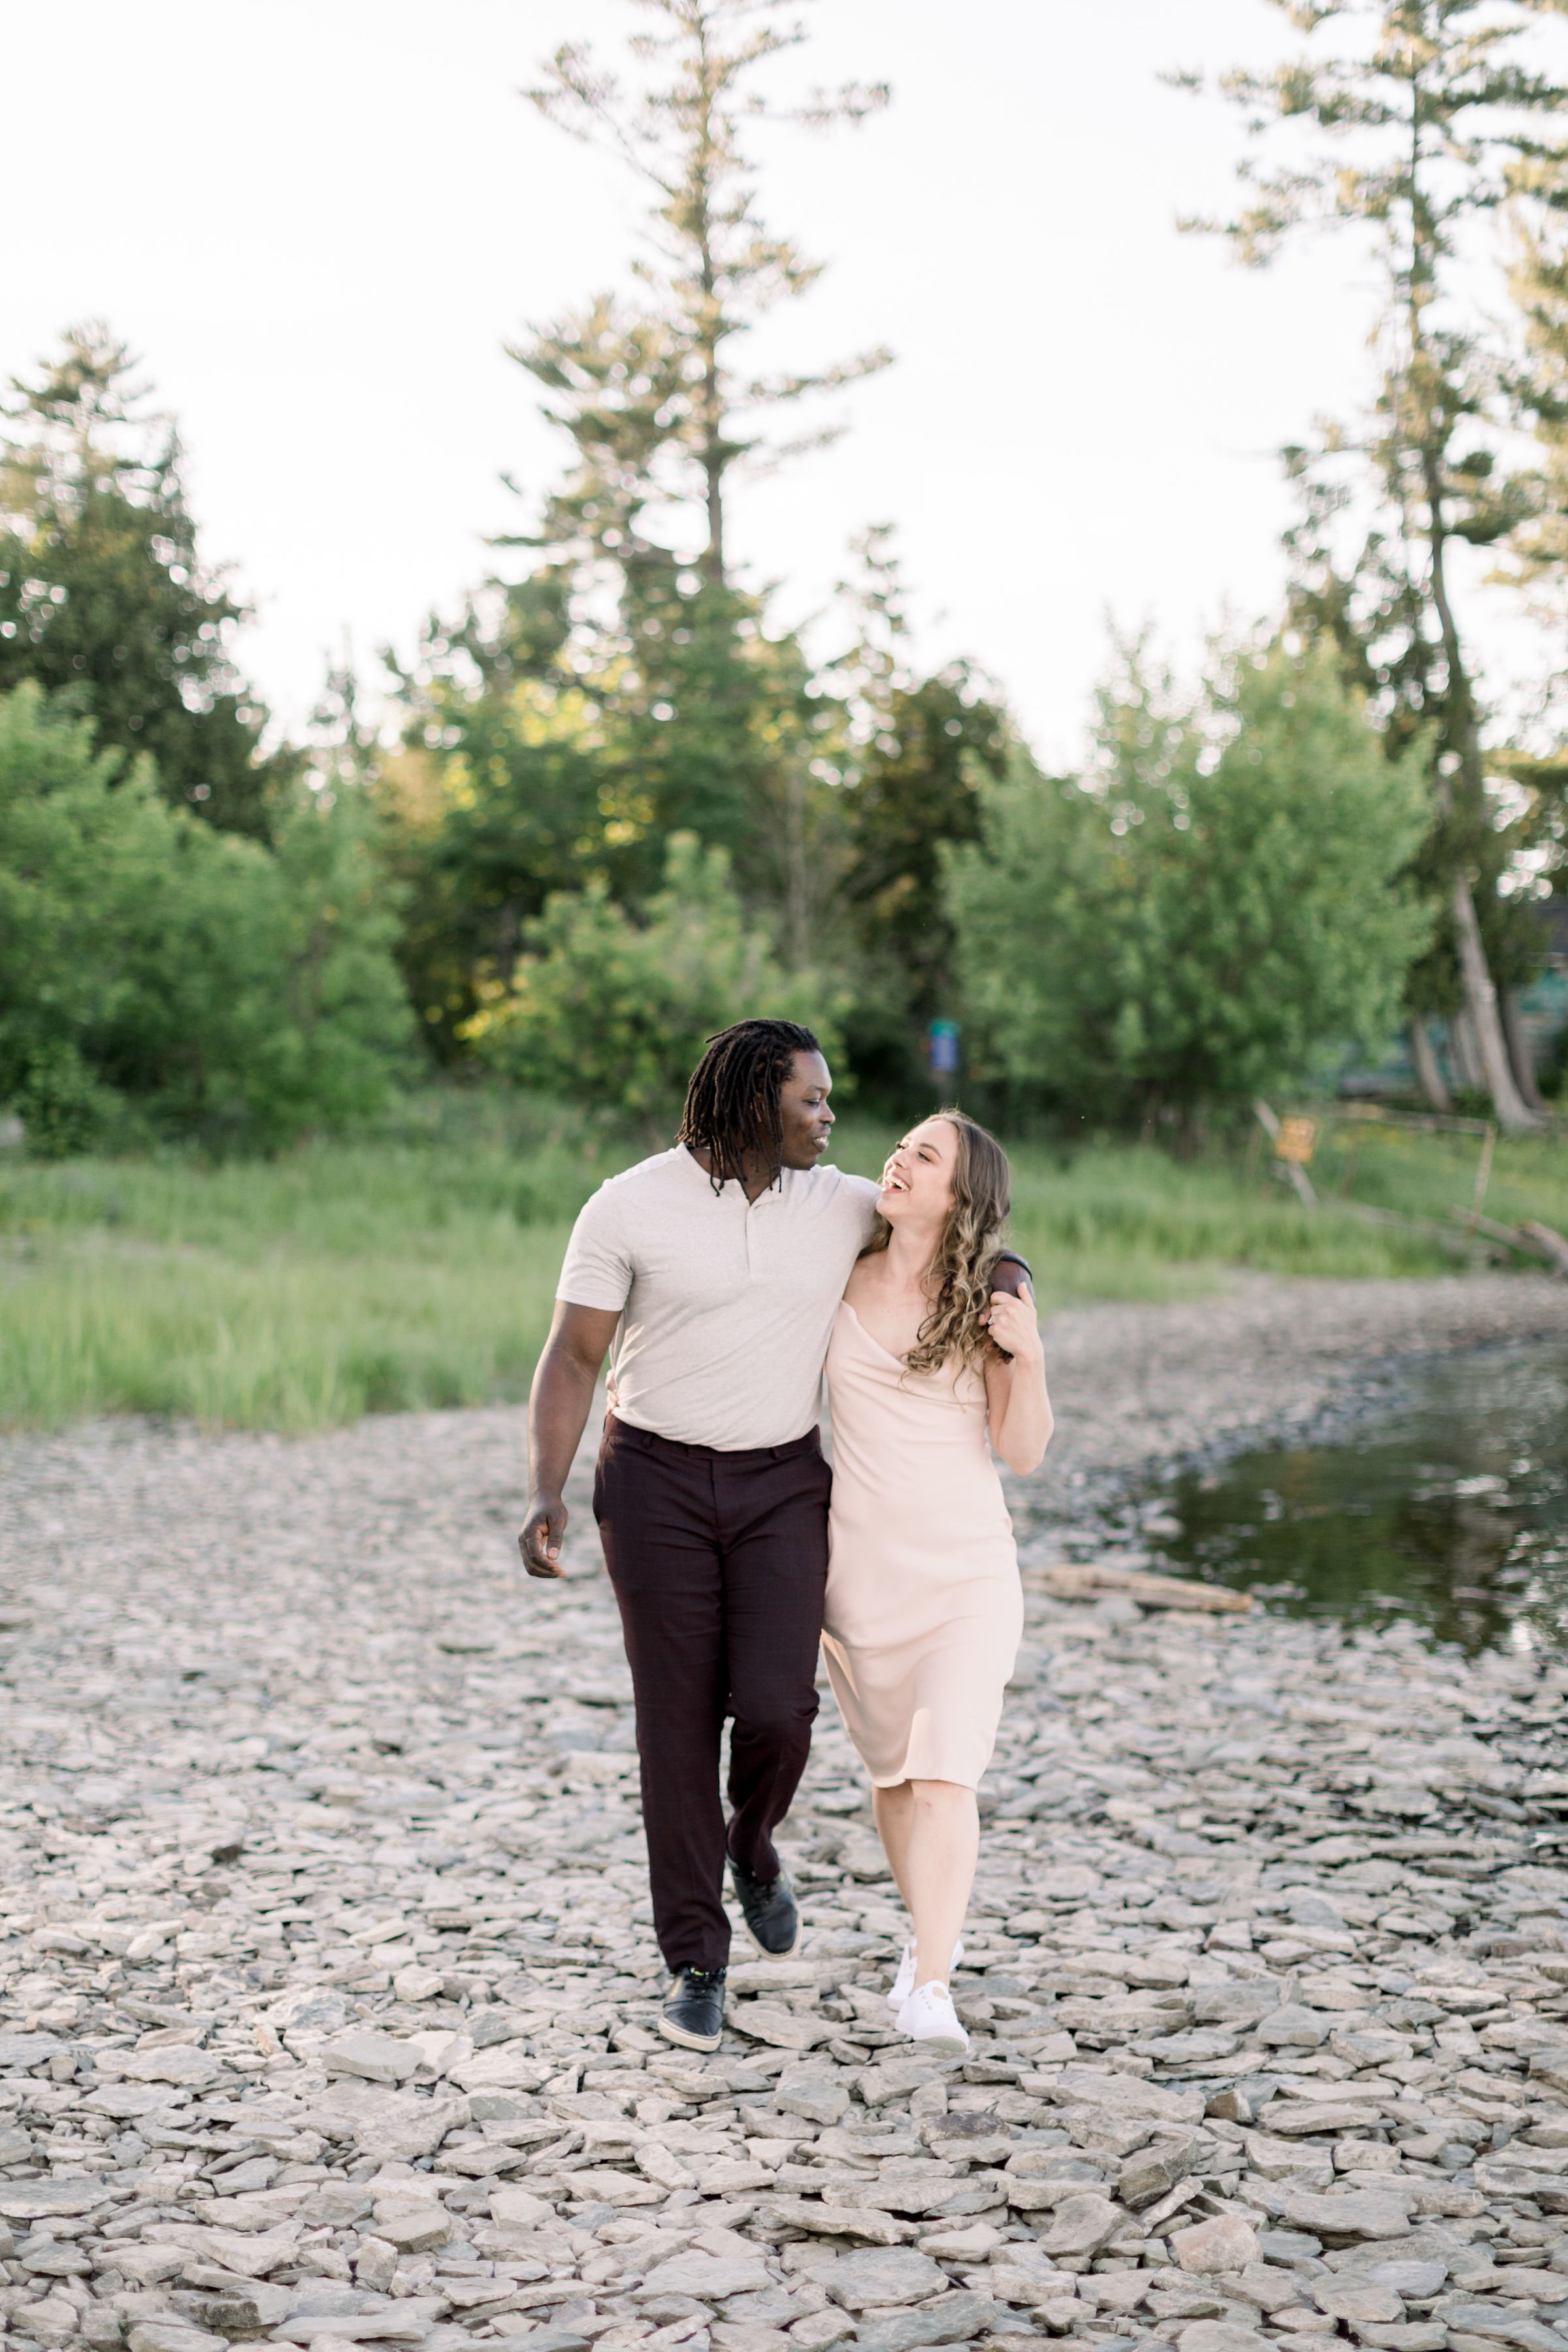  With arms around one another, an engaged couple walks along a stony shore by Chelsea Mason Photography. best friend engagements #Chelseamasonphotography #Chelseamasonengagements #Onatarioengagements #Pinhey'sPoint #Ontarioweddingphotographers 